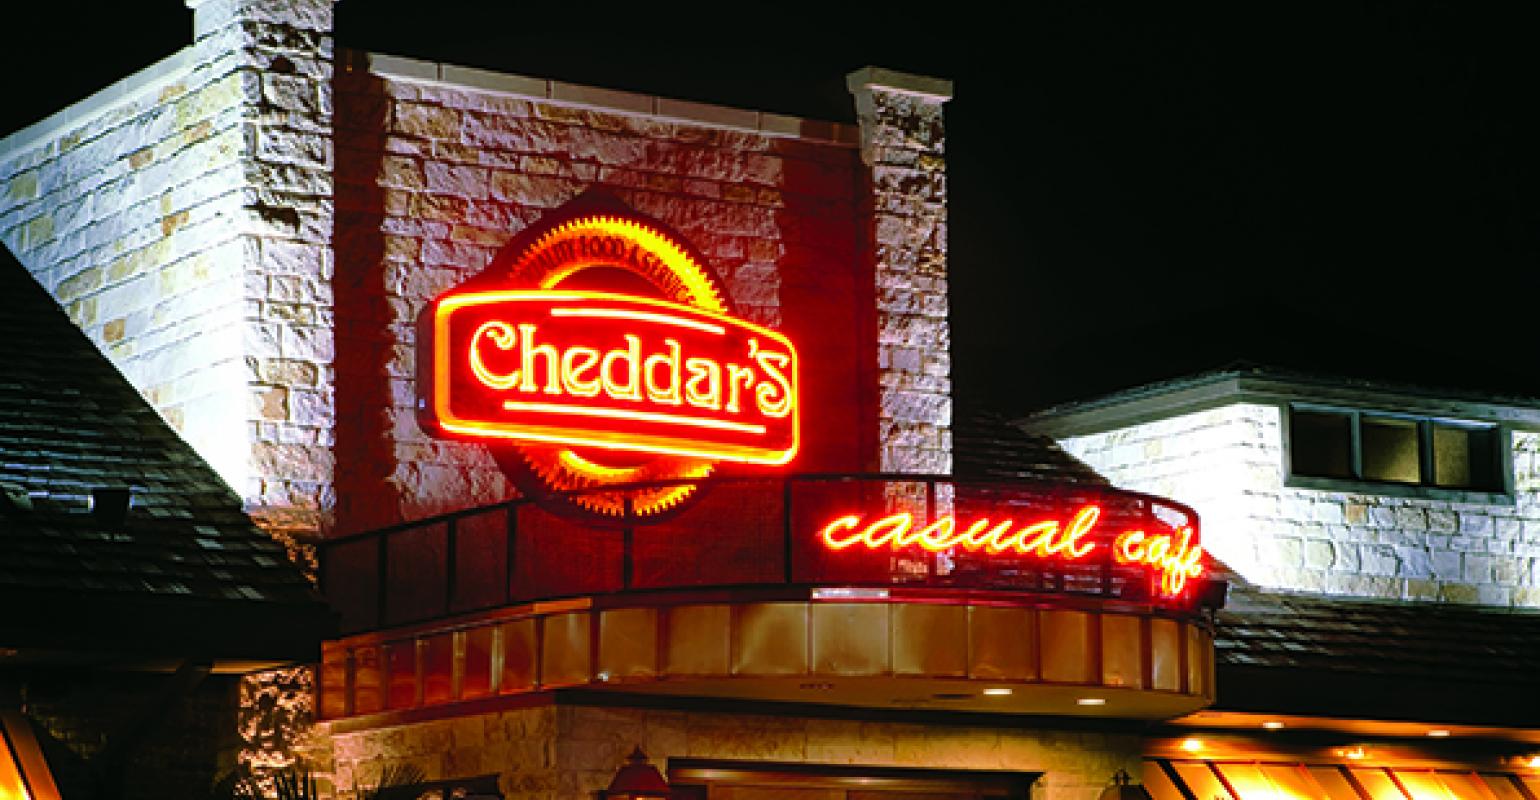 cheddars restaurant calories counter